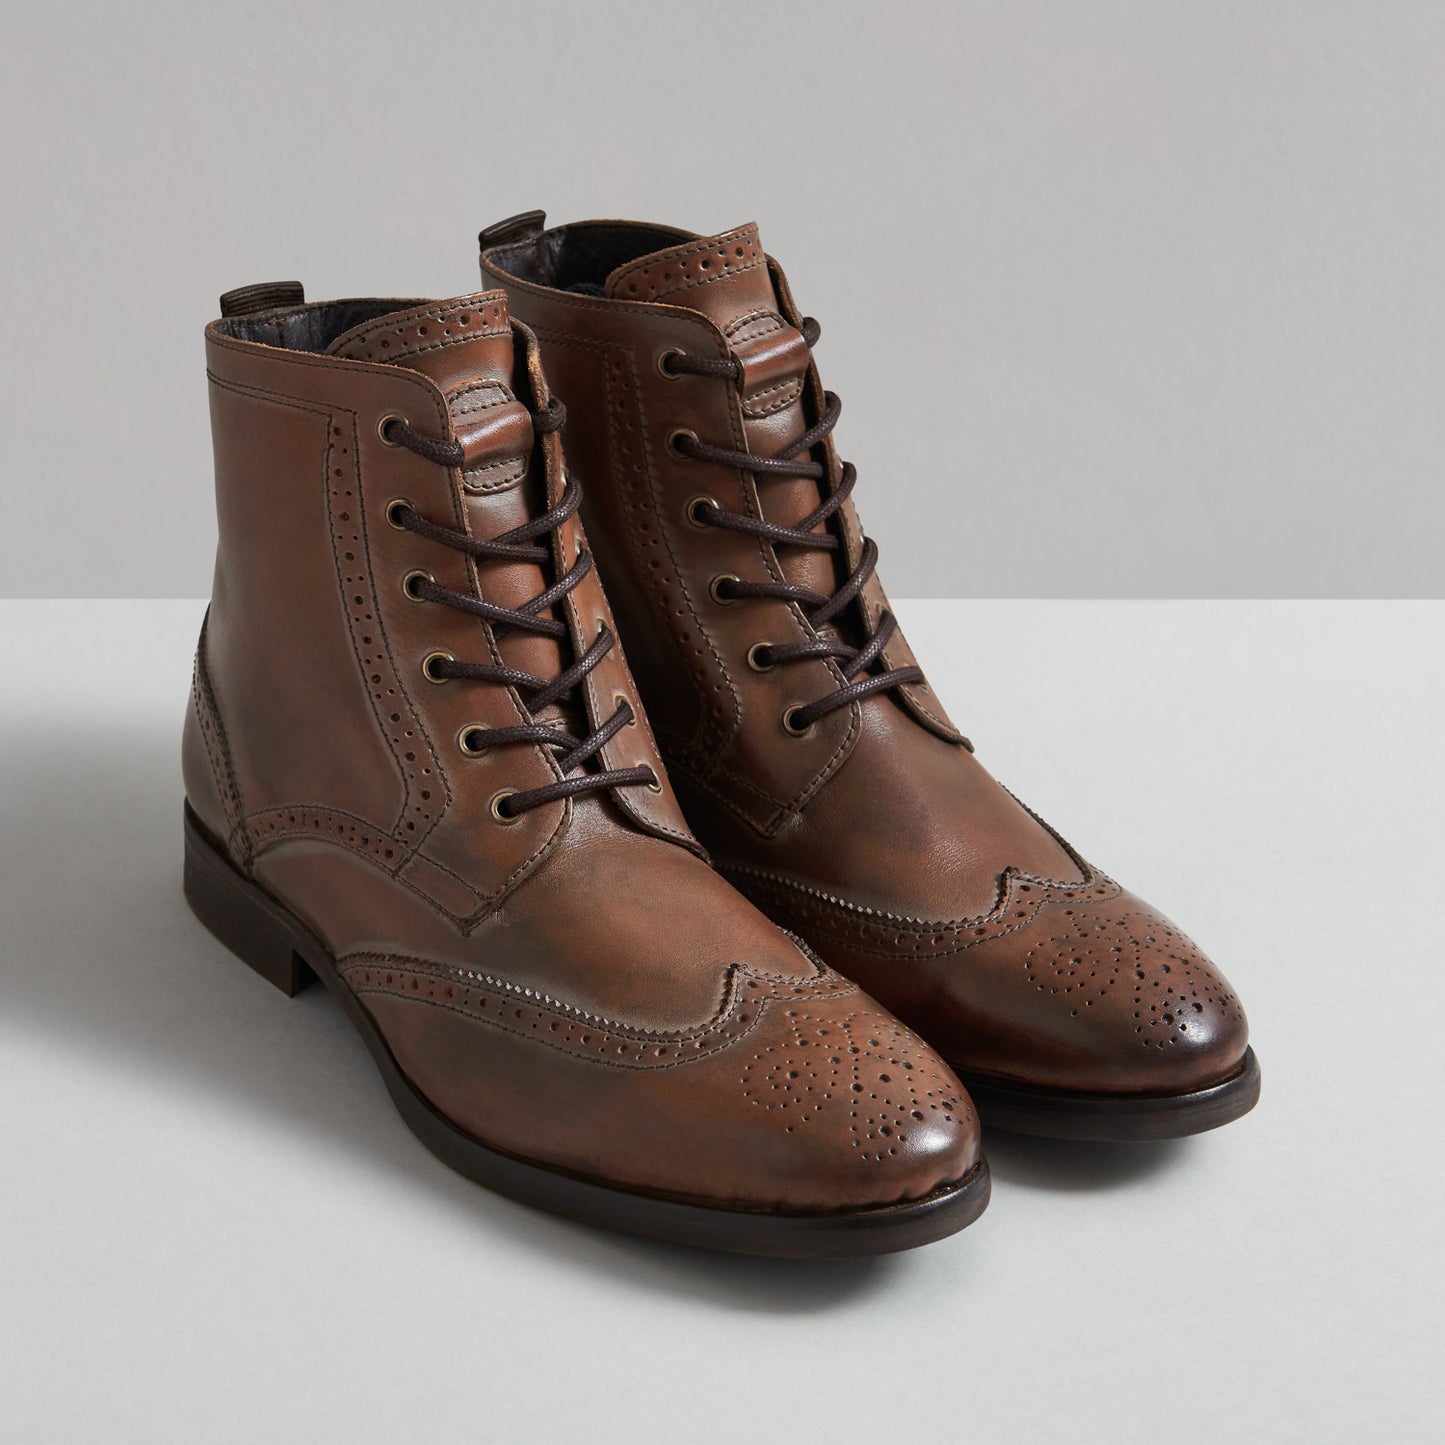 SIMPSON TAN WASHED LEATHER BOOT